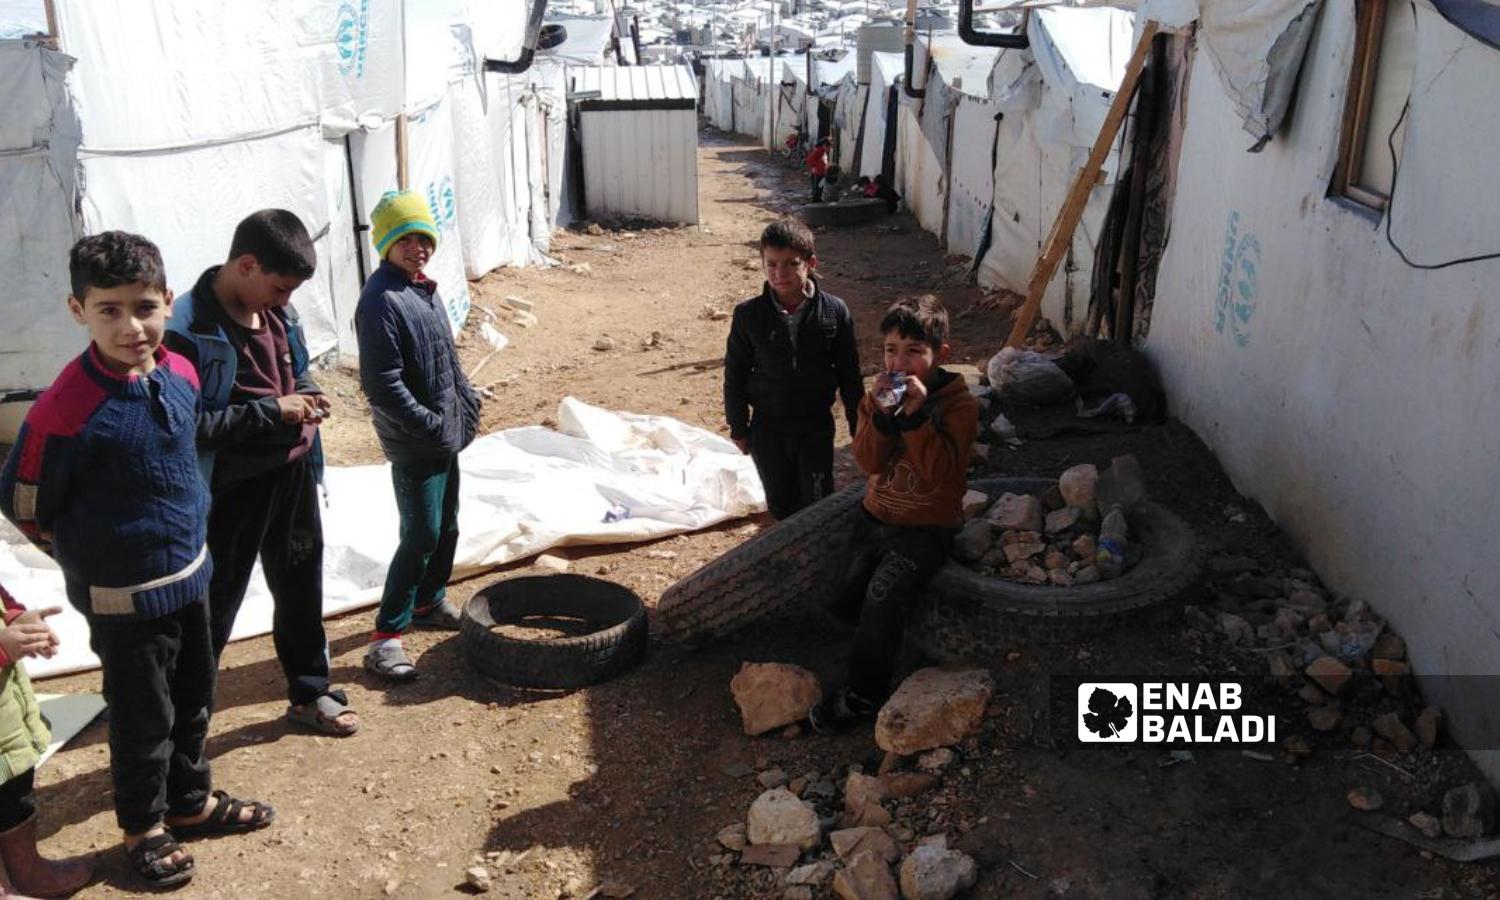 A group of Syrian children play in a camp for Syrian refugees in Arsal city, Lebanon - January 27, 2024 (Enab Baladi)
